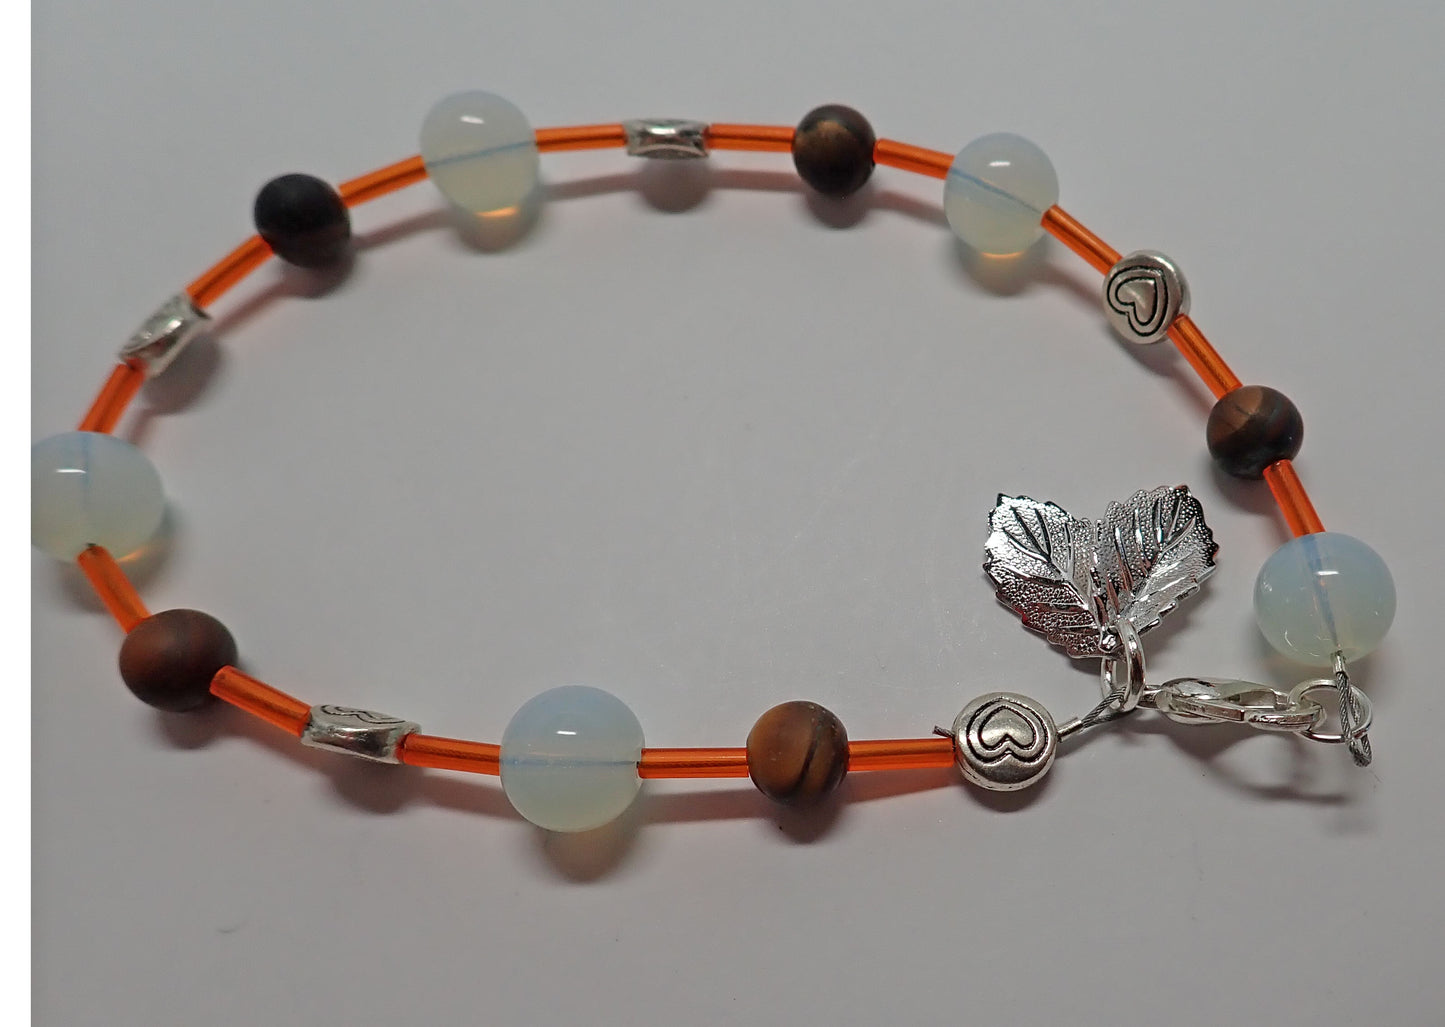 Jewelry, bracelet, glass beads, wooden beads, heart beads, leaf charms, orange, white, brown, gift